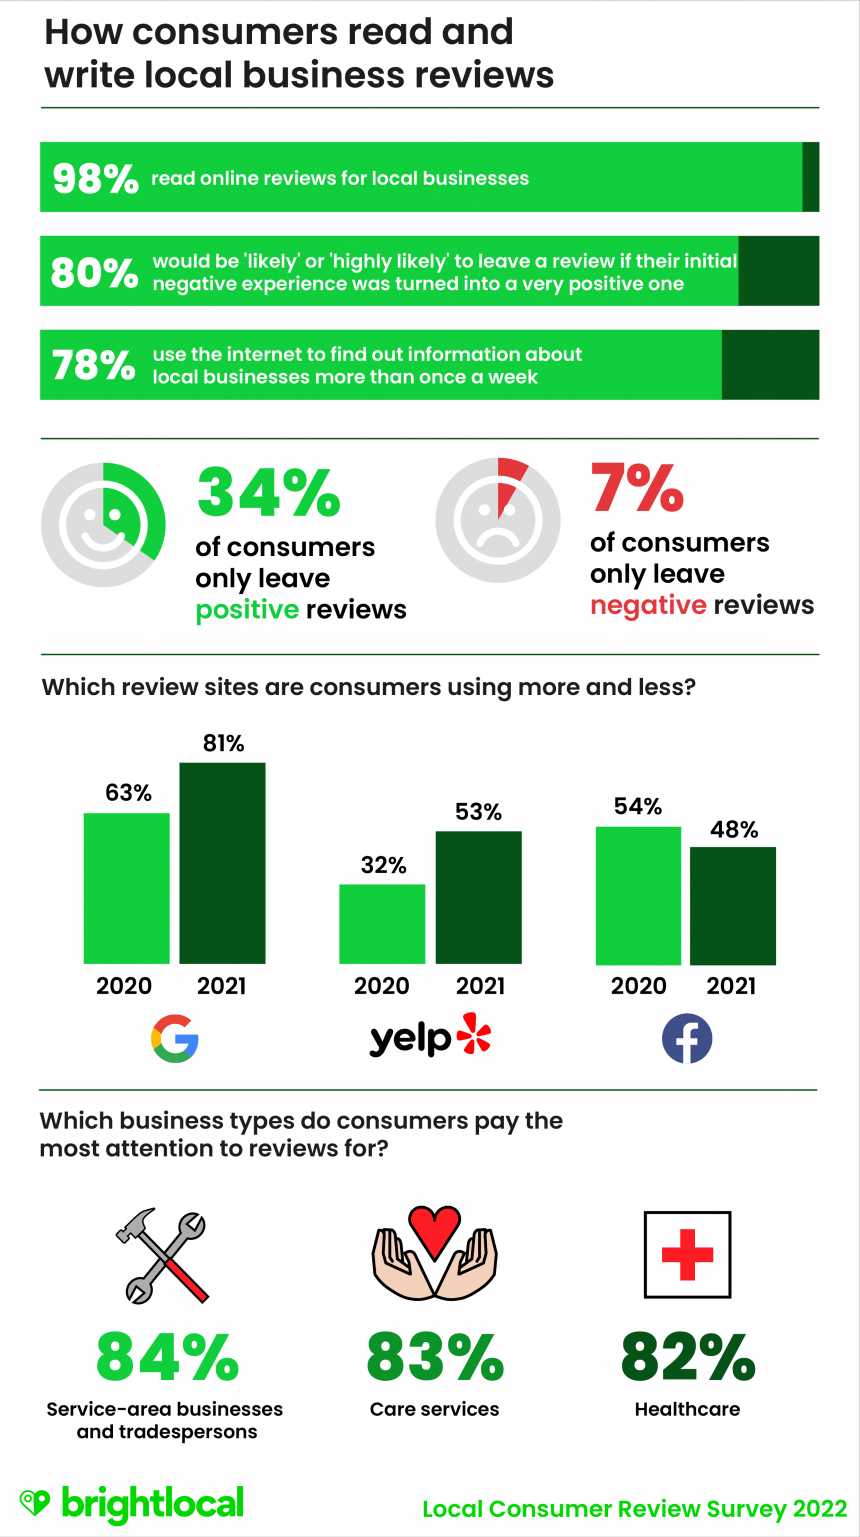 How consumers read and write reviews